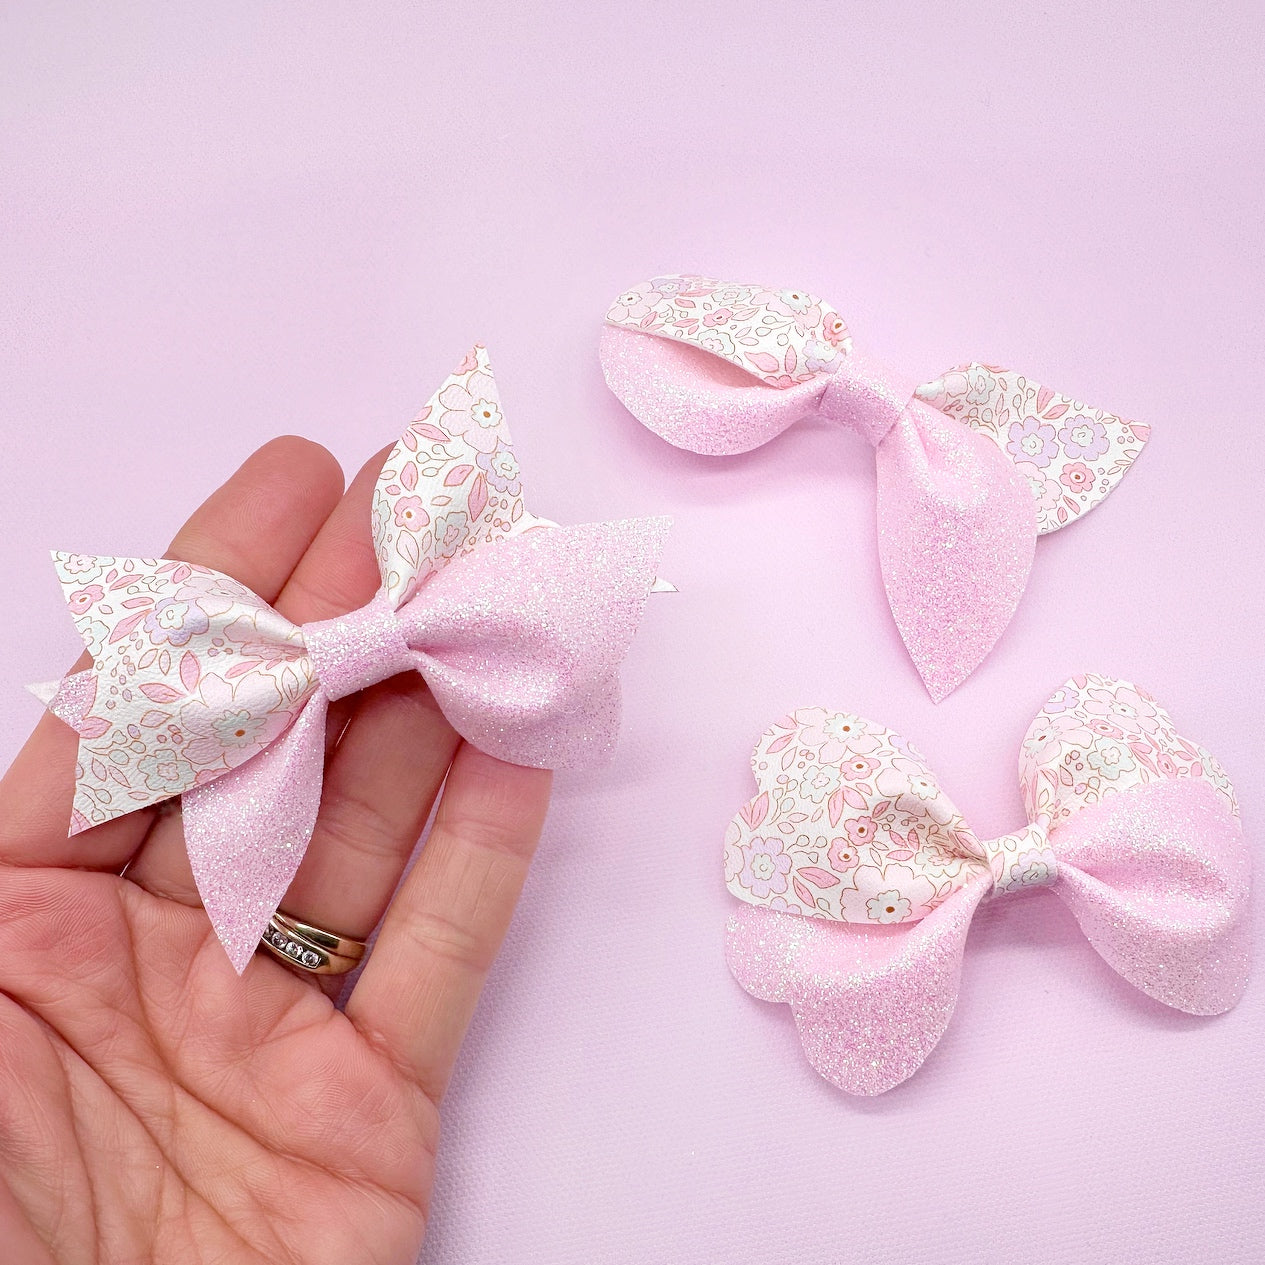 Exclusive Ditsy Dainty Pinch Bow Set 3.5'' SVG/PDF